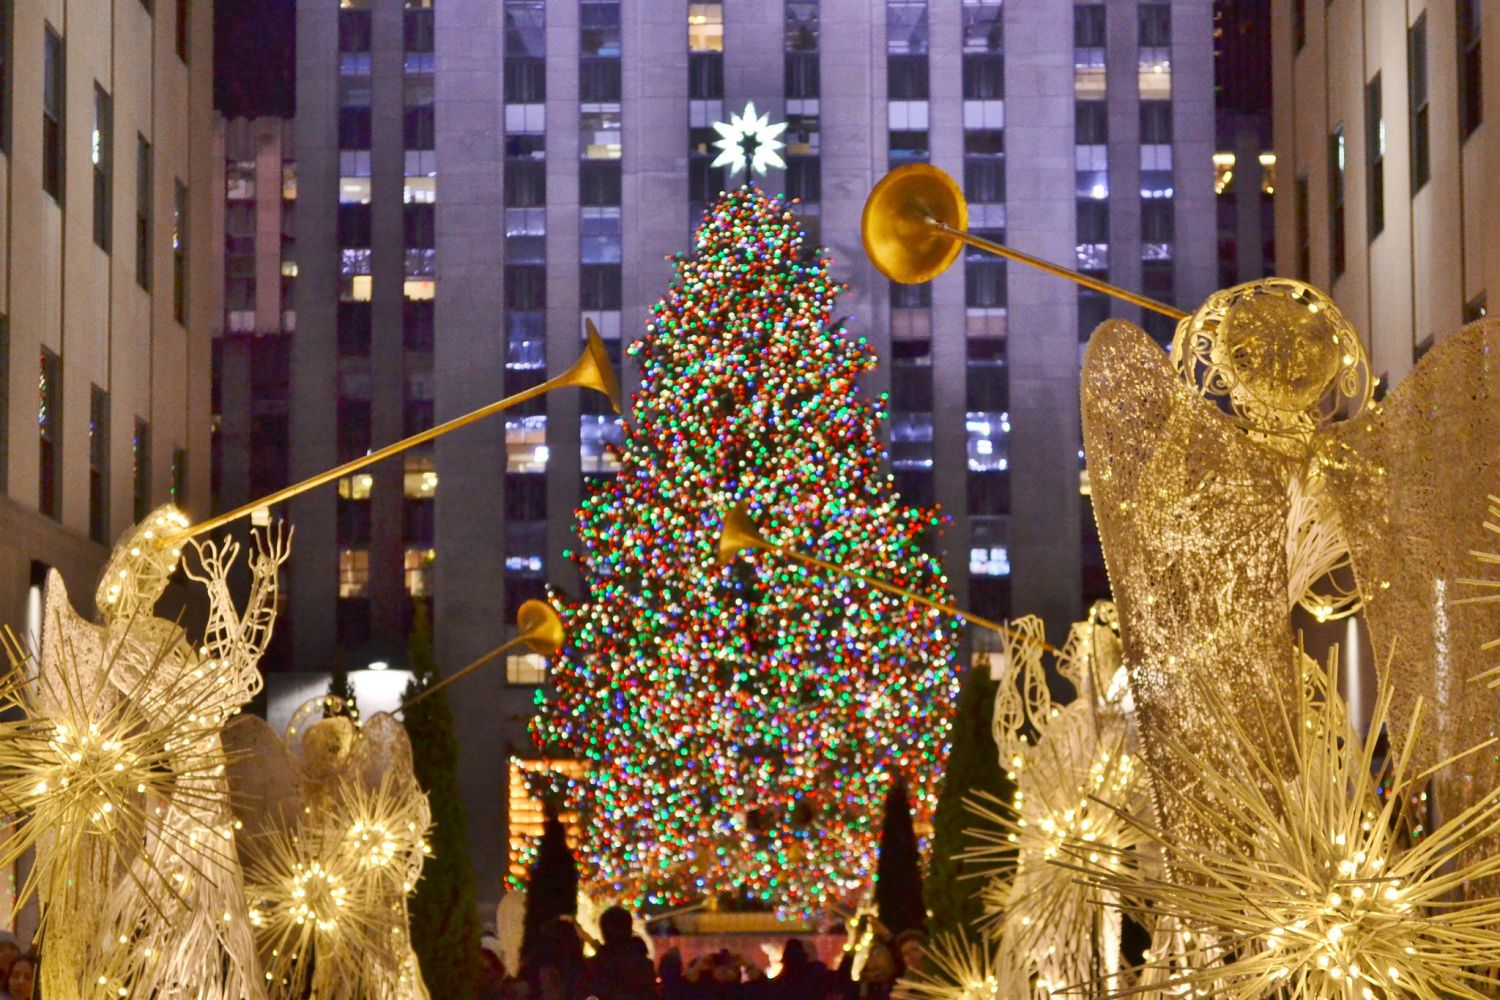 Go set-jetting at Christmas in New York City